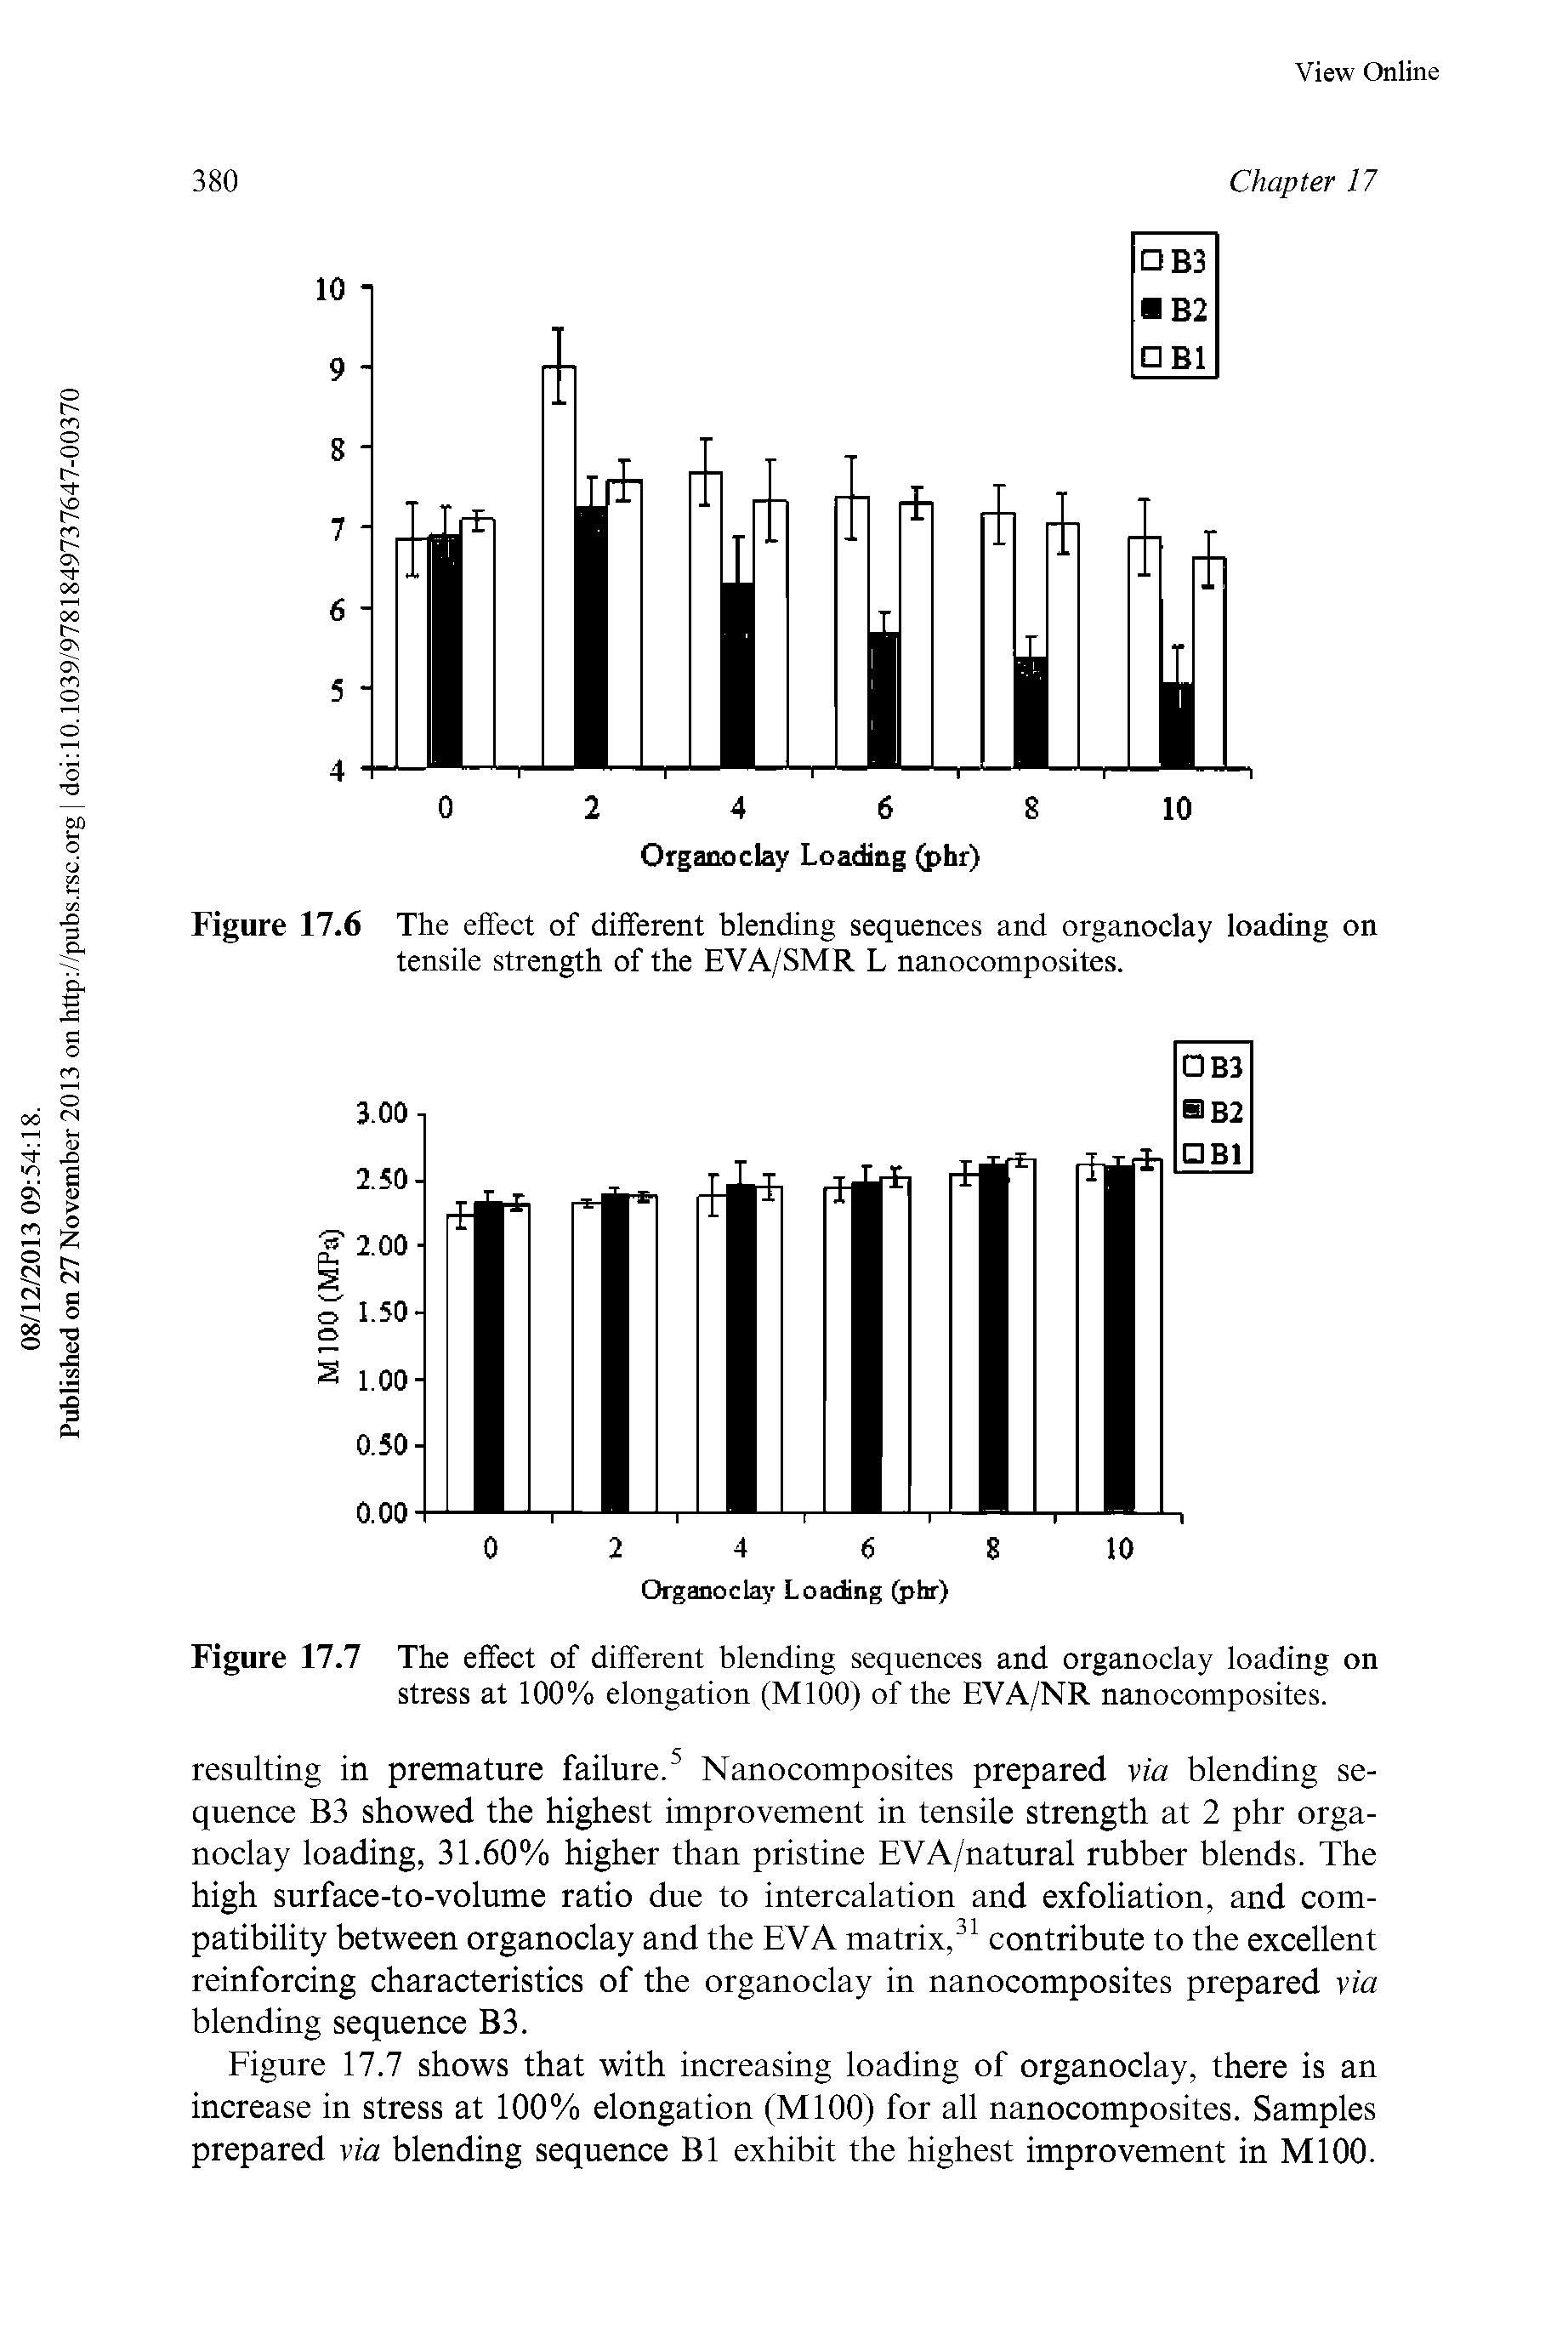 Figure 17.6 The effect of different blending sequences and organoclay loading on tensile strength of the EVA/SMR L nanocomposites.